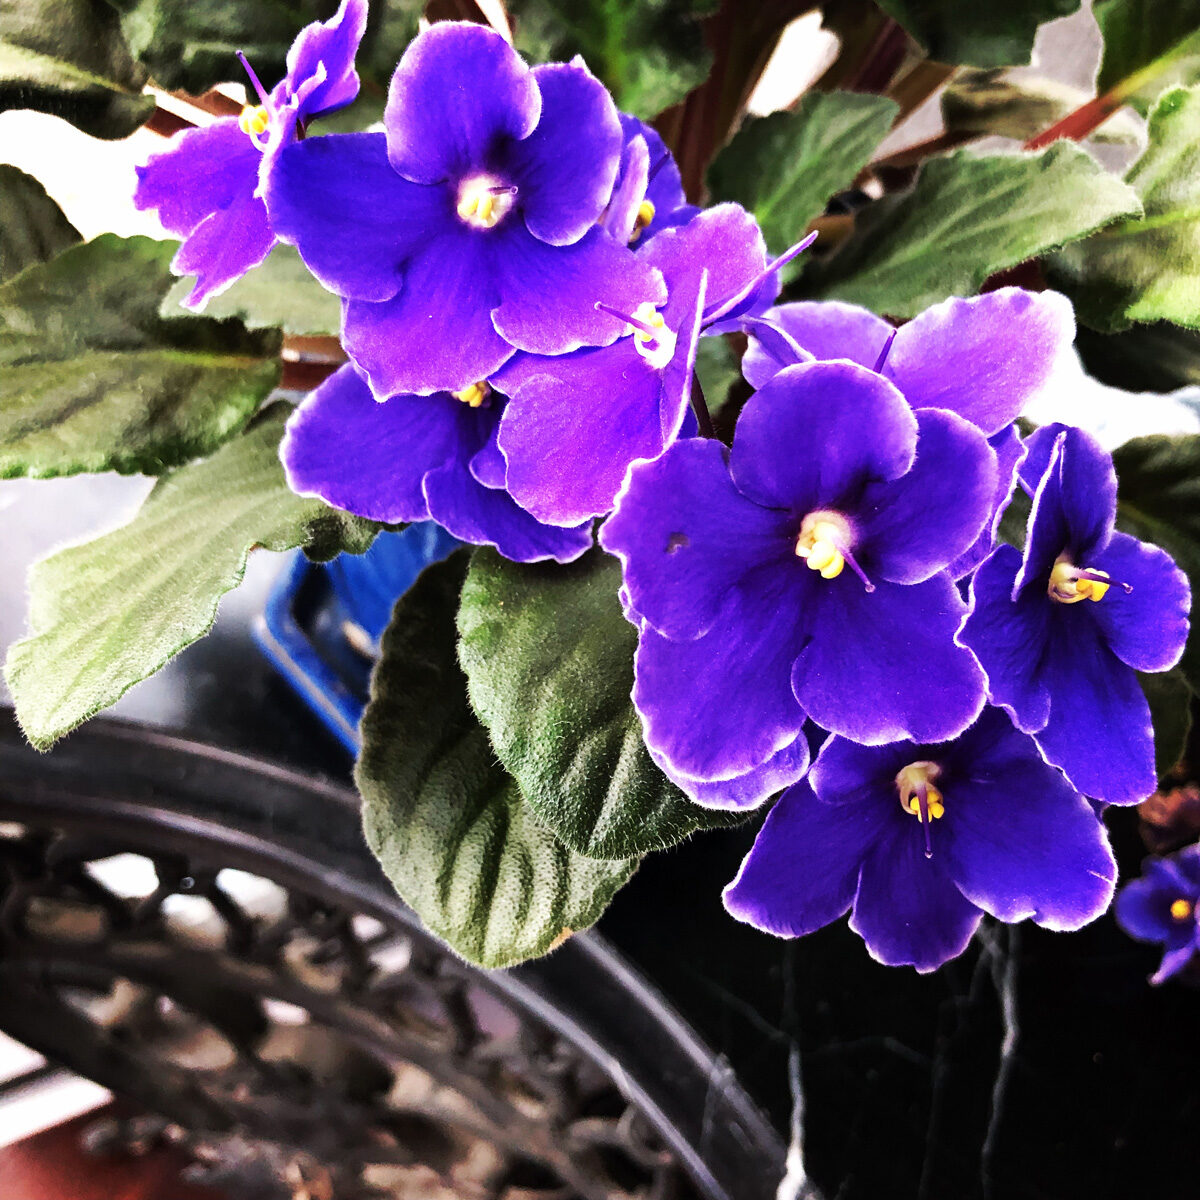 Are African Violets Poisonous to Cats? 3 Things to Know